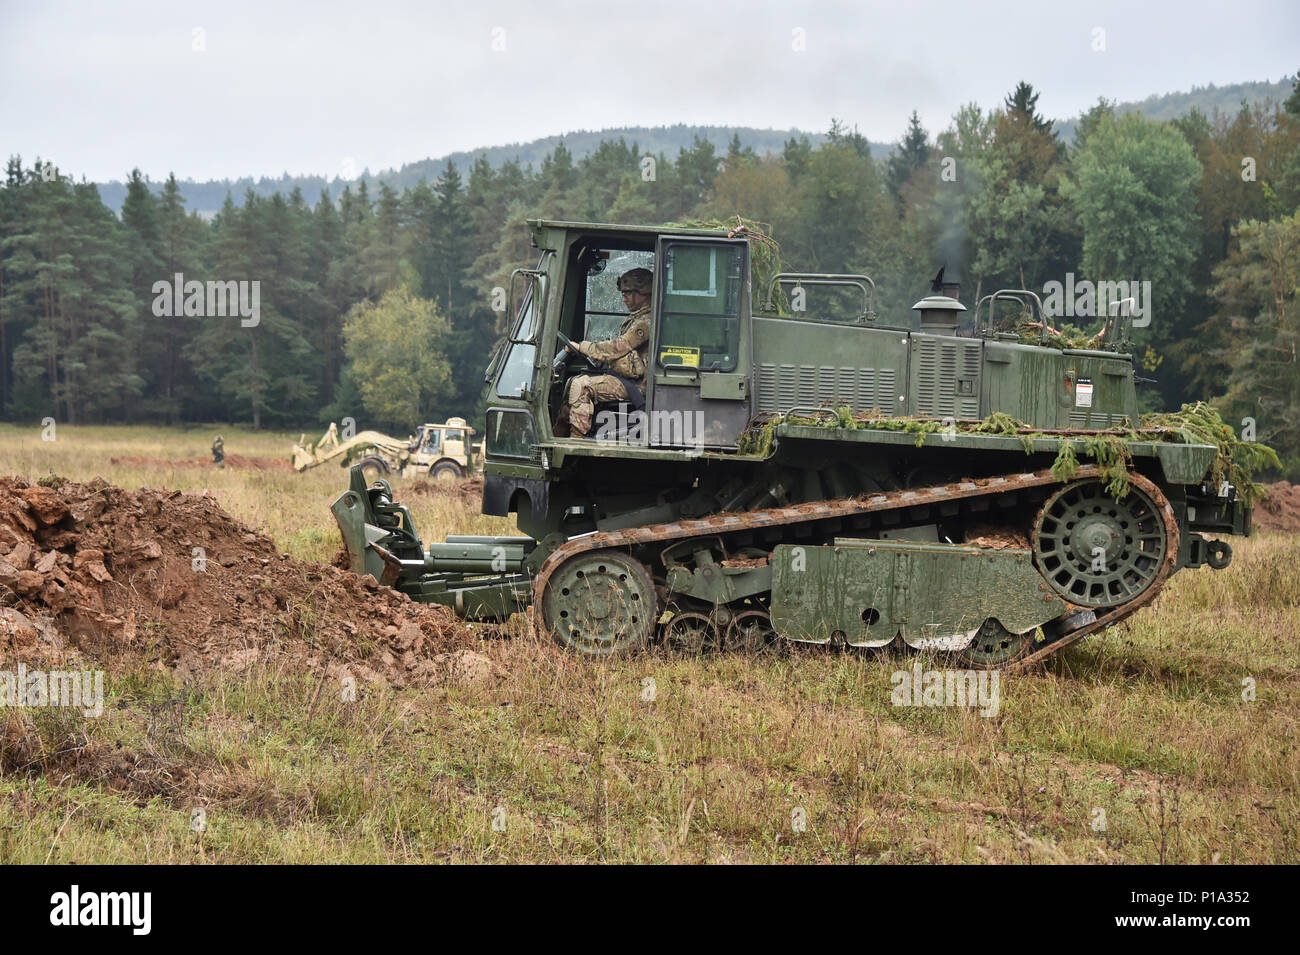 A U.S. Soldier, assigned to Bravo Troop, Regimental Engineer Squadron, 2d Cavalry Regiment, operates a M105 DEUCE-Deployable Universal Combat Earthmover during Exercise Allied Spirit V at 7th Army Training Command’s Hohenfels Training Area, Germany, Oct. 4, 2016. Exercise Allied Spirit includes about 2,520 participants from eight NATO nations, and exercises tactical interoperability and tests secure communications within Alliance members and partner nations.  (U.S. Army photo by Visual Information Specialist Gertrud Zach) Stock Photo